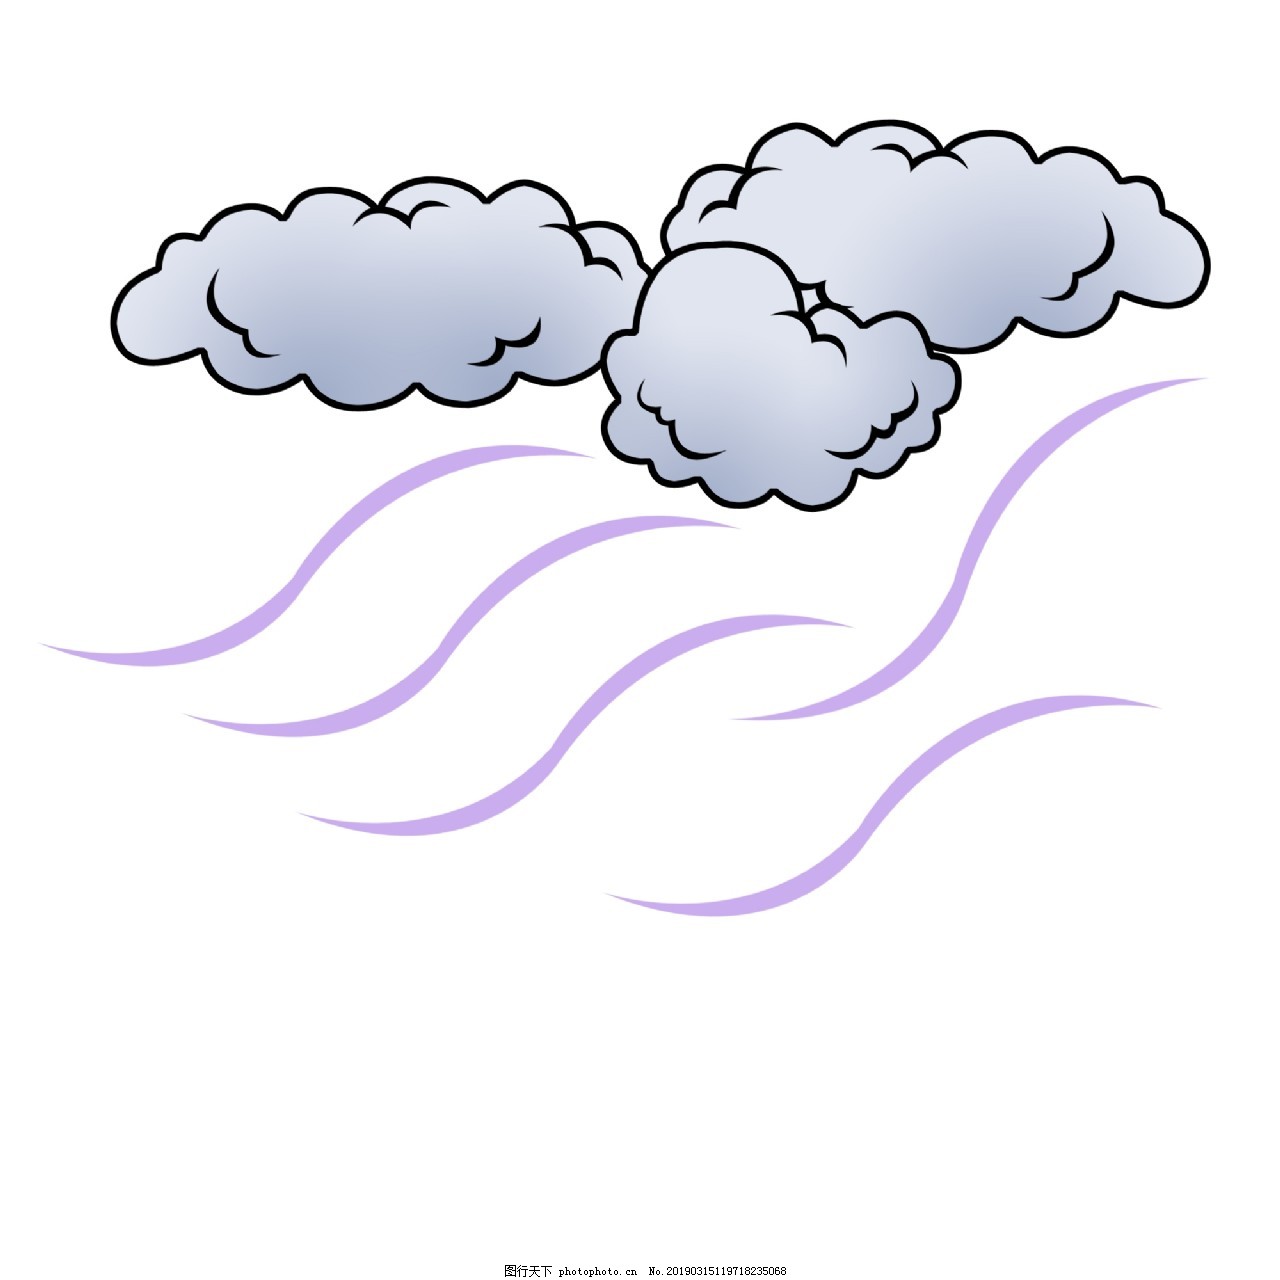 Windy Weather PNG Picture, Windy Weather Meteorological Illustration ...